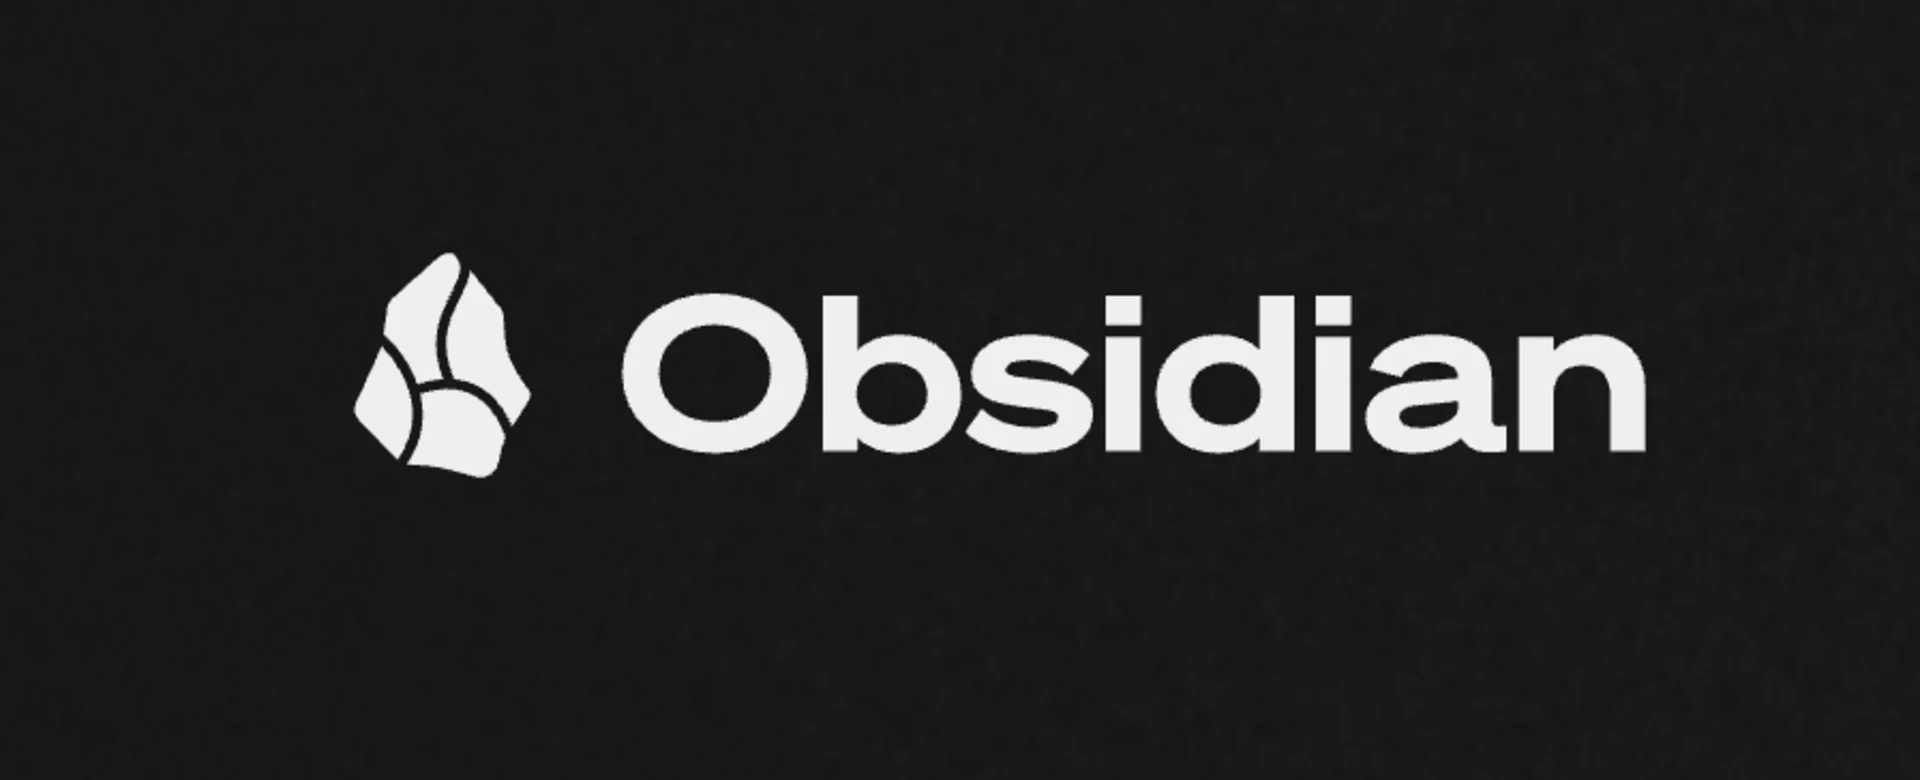 Obsidian New Text Logo, Not PNG